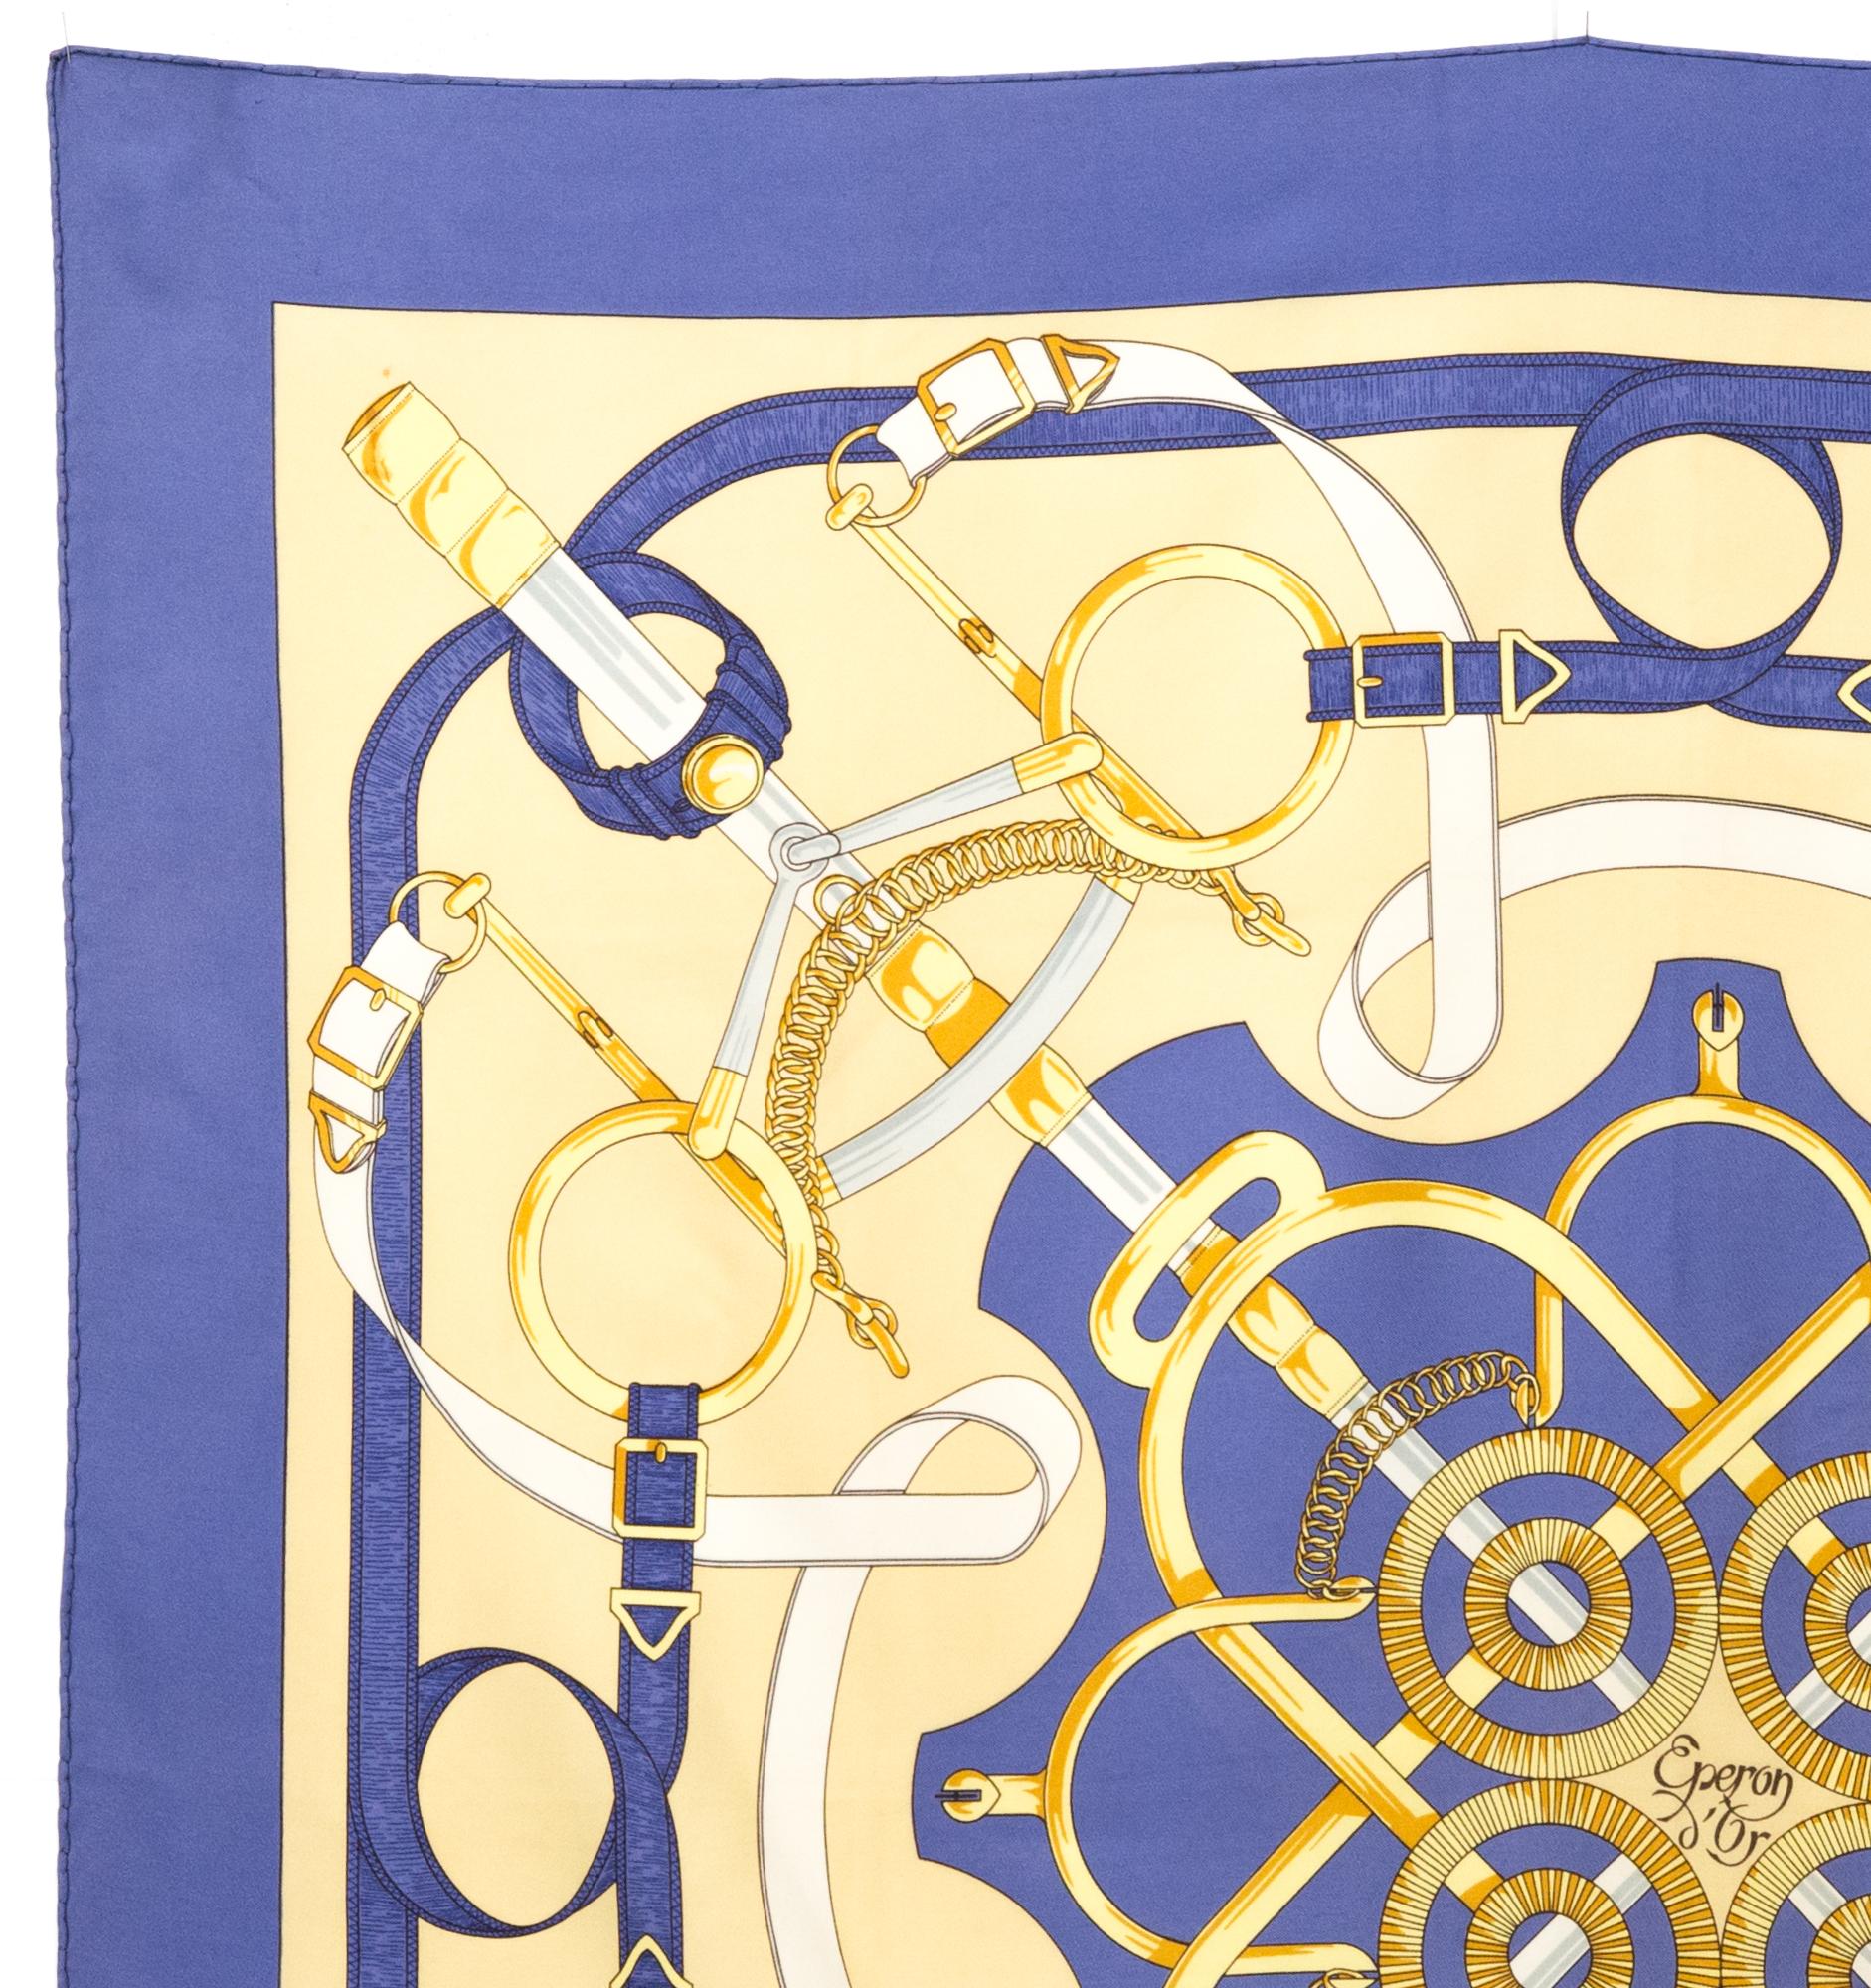 Hermes silk scarf « Les Eperons d’Or»  by Henri d'Origny   featuring a blue border, a Hermès signature. 
Circa 1989
In good vintage condition. Made in France.
35,4in. (90cm)  X 35,4in. (90cm)
We guarantee you will receive this  iconic item as